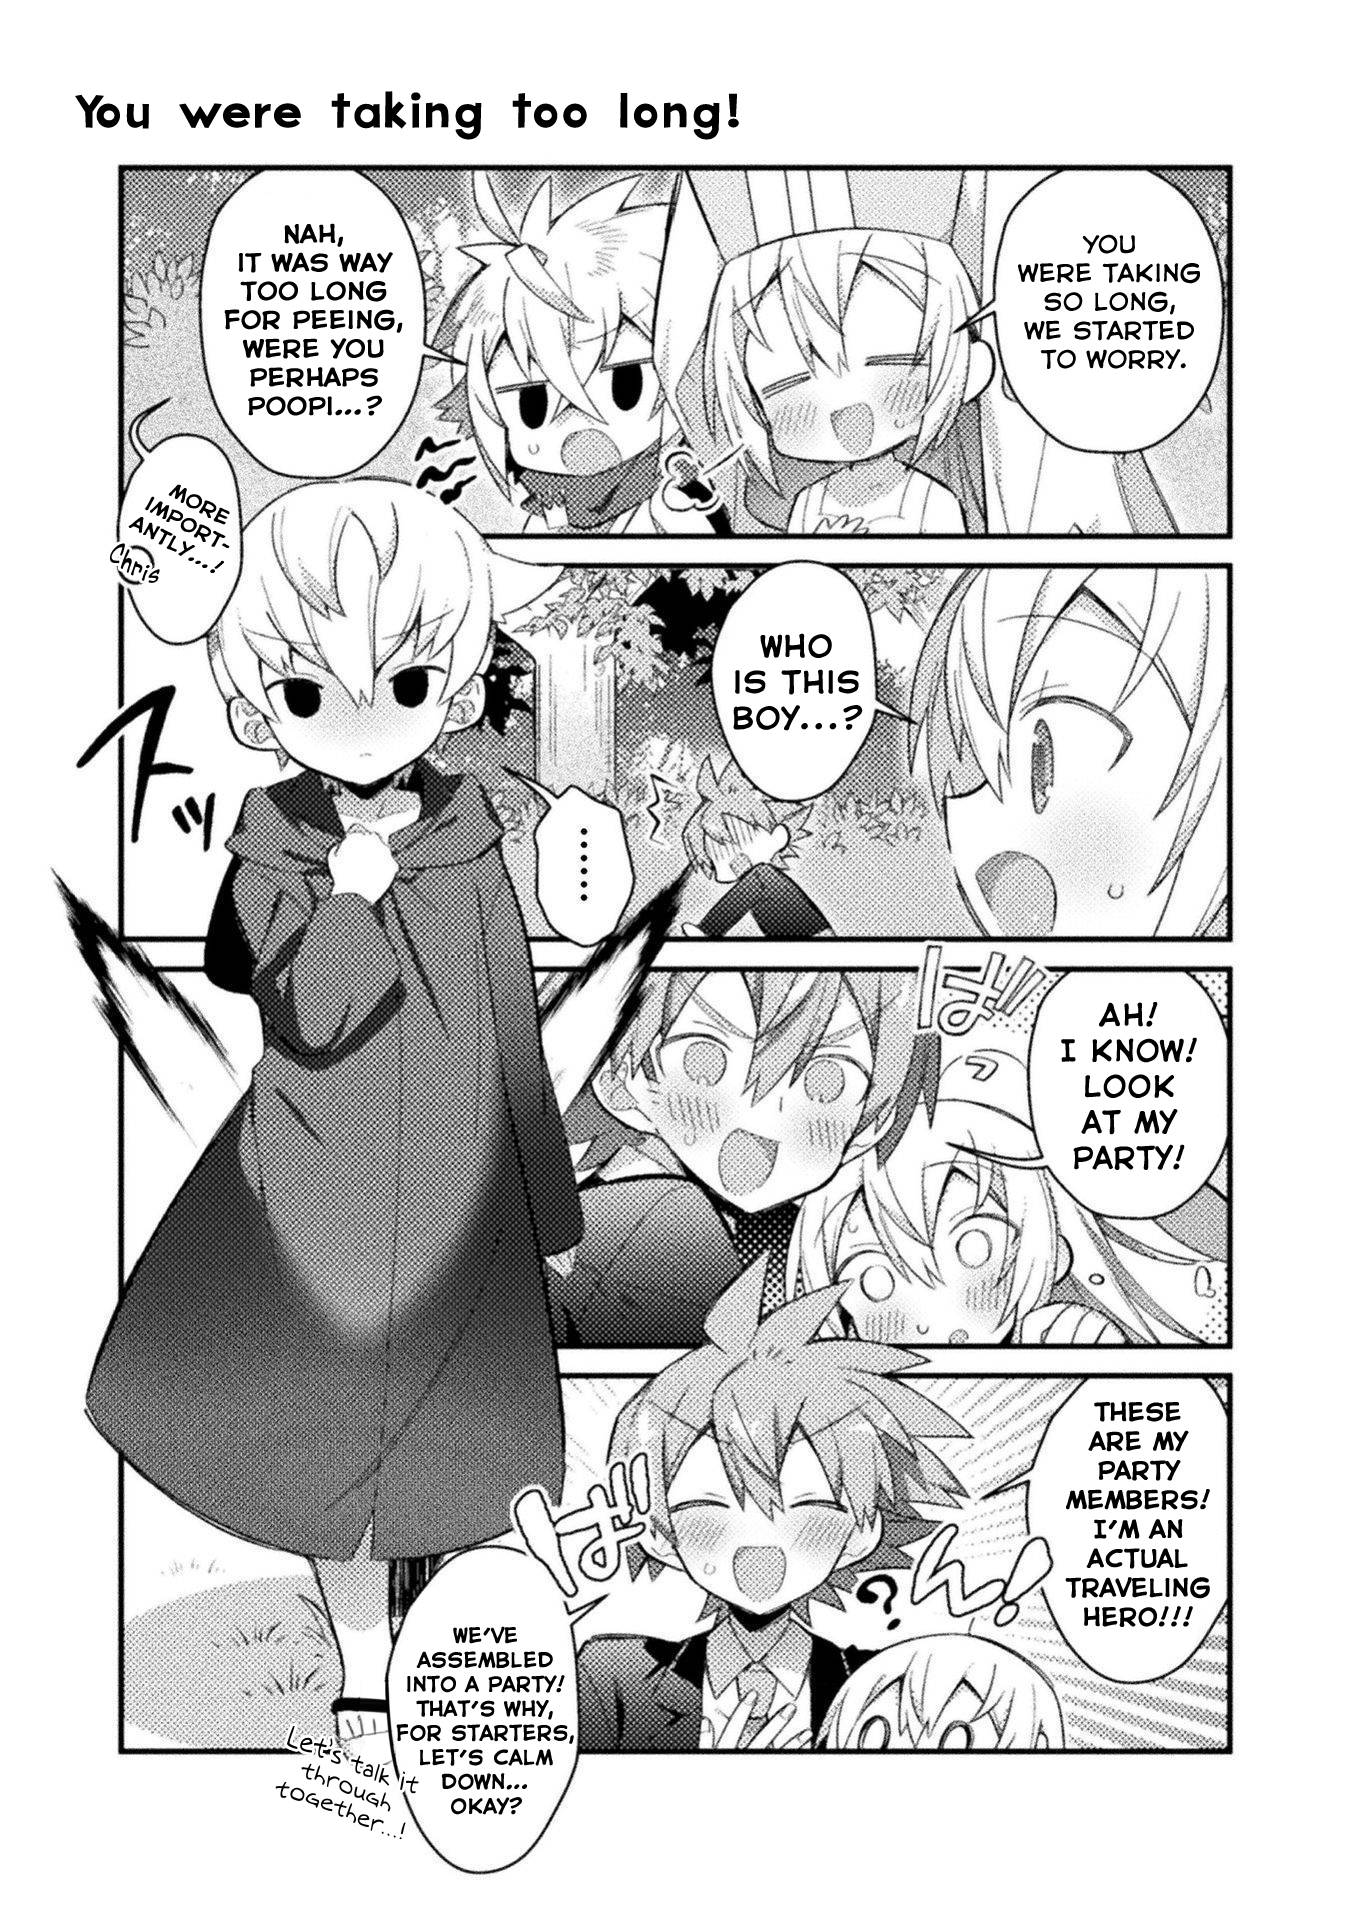 After Reincarnation, My Party Was Full Of Boys, But I'm Not A Shotacon! - chapter 15 - #2